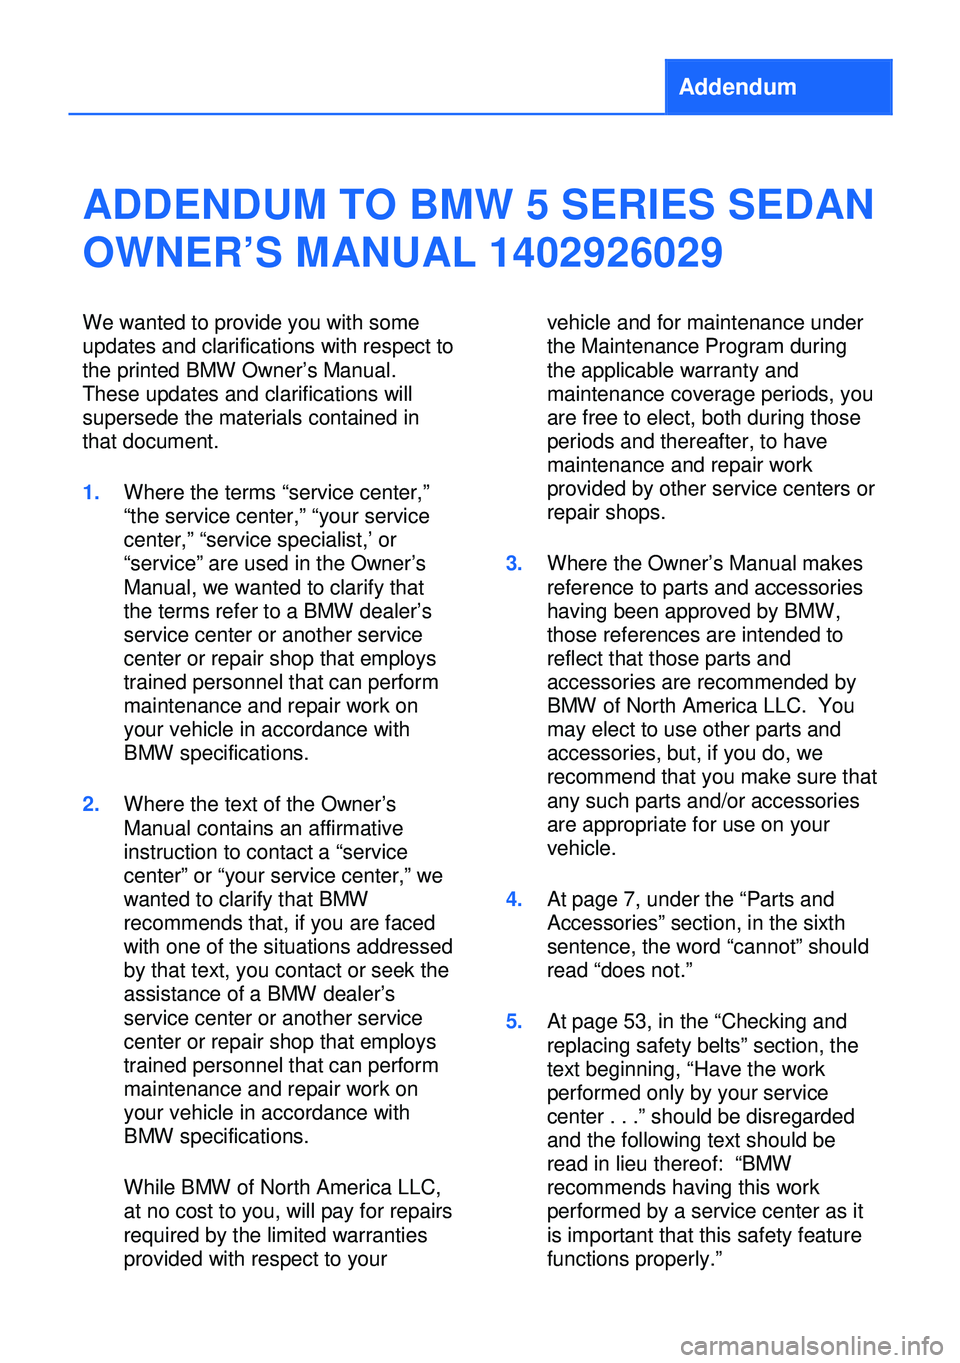 BMW 528I SEDAN 2013  Owners Manual Addendum
ADDENDUM TO BMW 5 SERIES SEDAN
OWNER’S MANUAL 1402926029
We wanted to provide you with some
updates and clarifications with respect to
the printed BMW Owner’s Manual.
These updates and cl